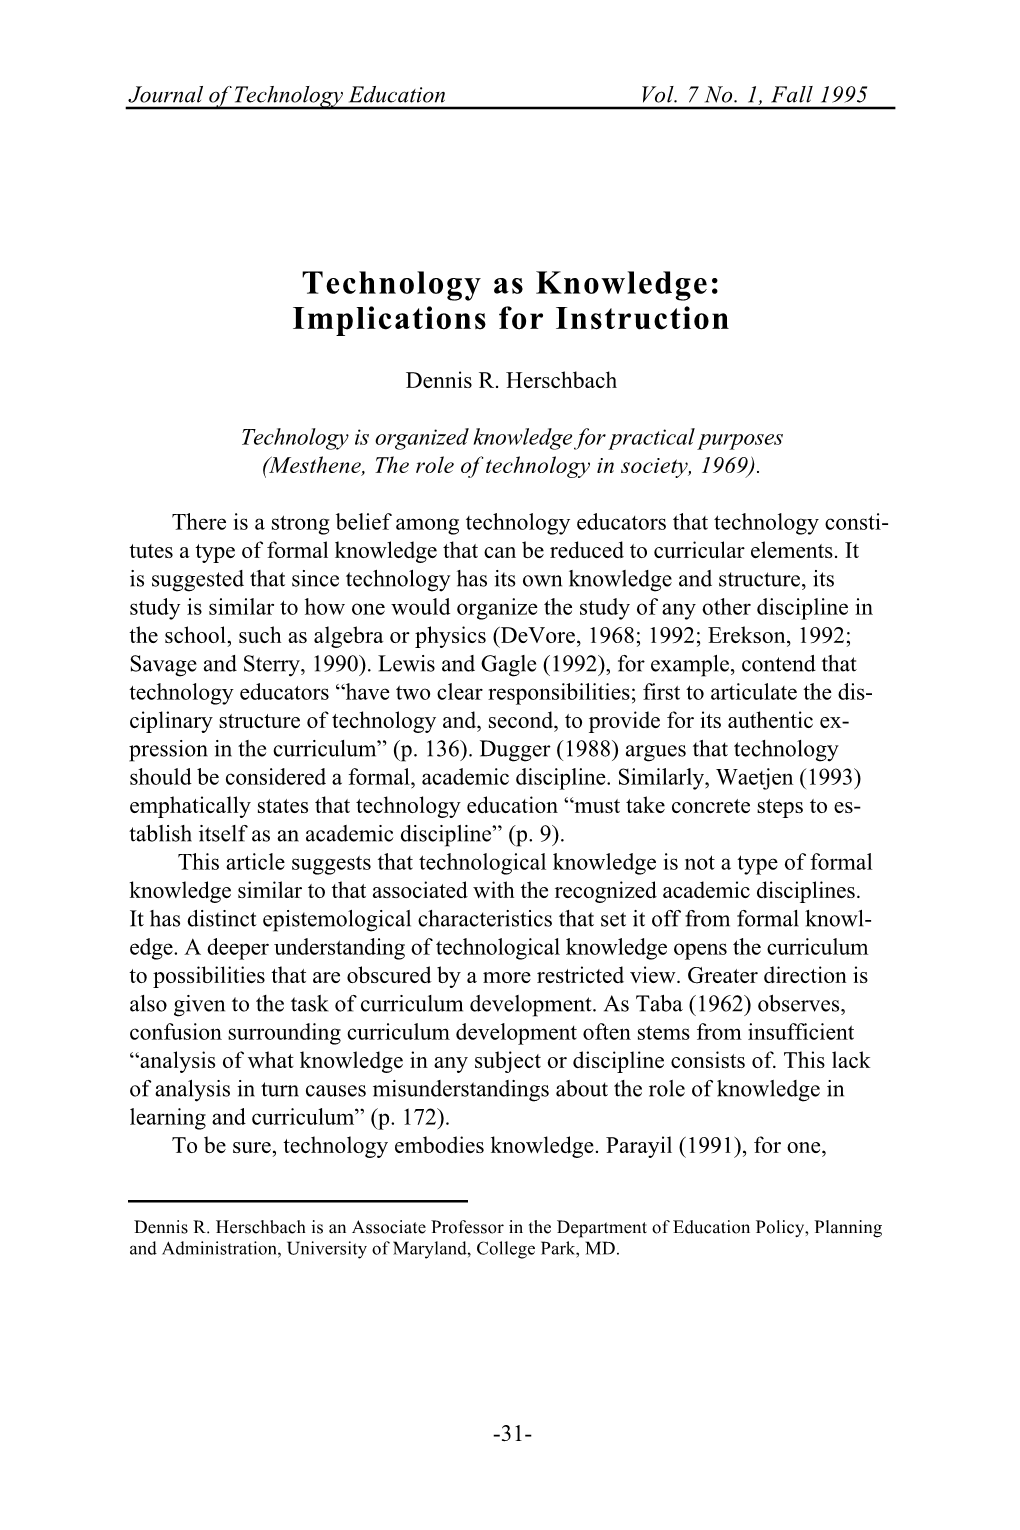 Technology As Knowledge: Implications for Instruction